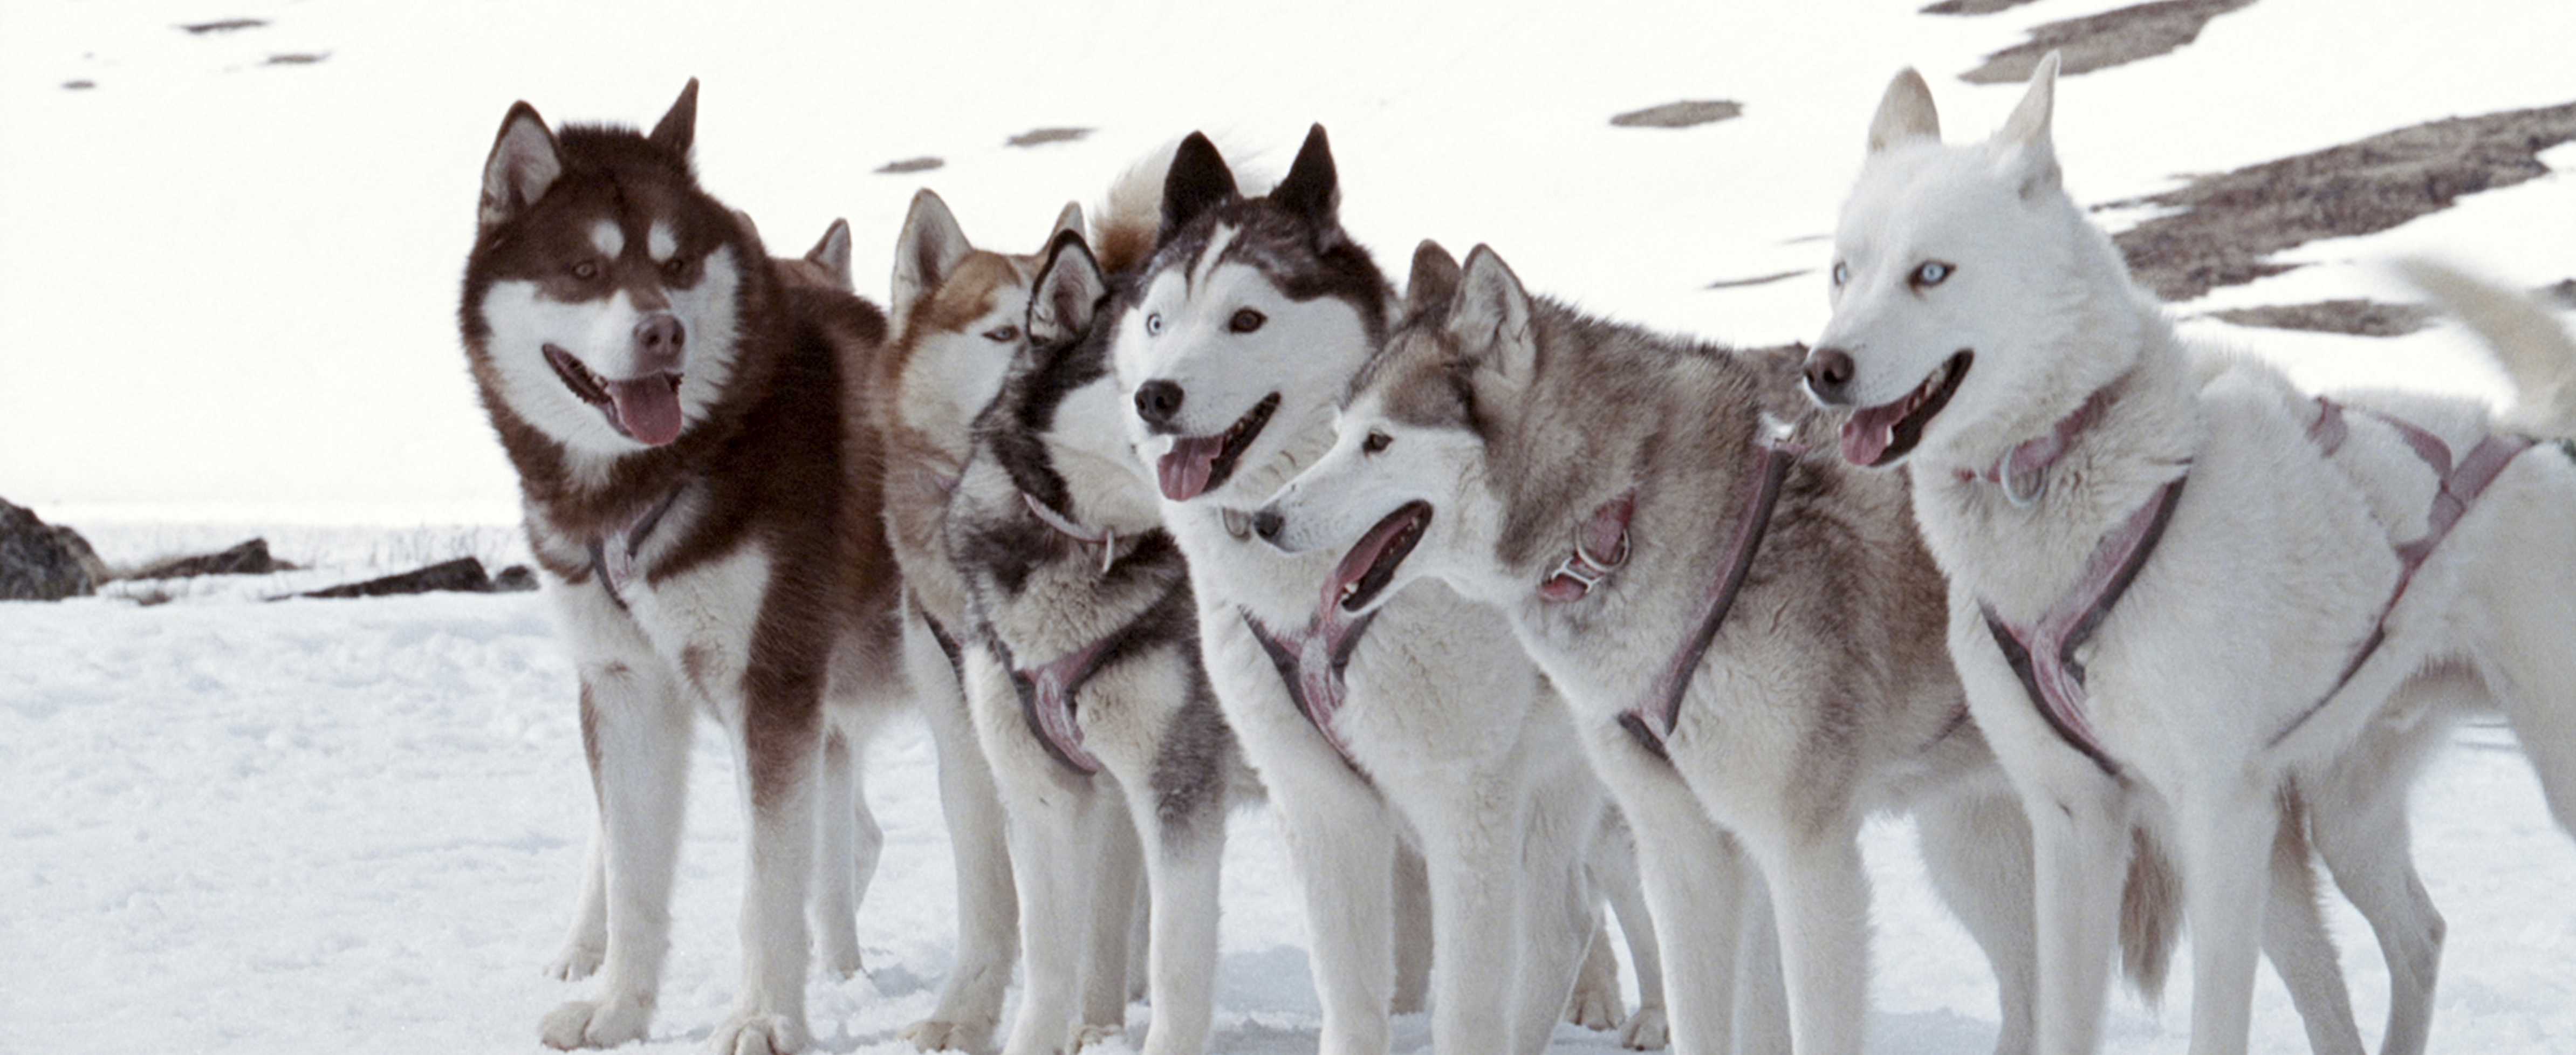 Eight Below Backgrounds, Compatible - PC, Mobile, Gadgets| 4776x1956 px